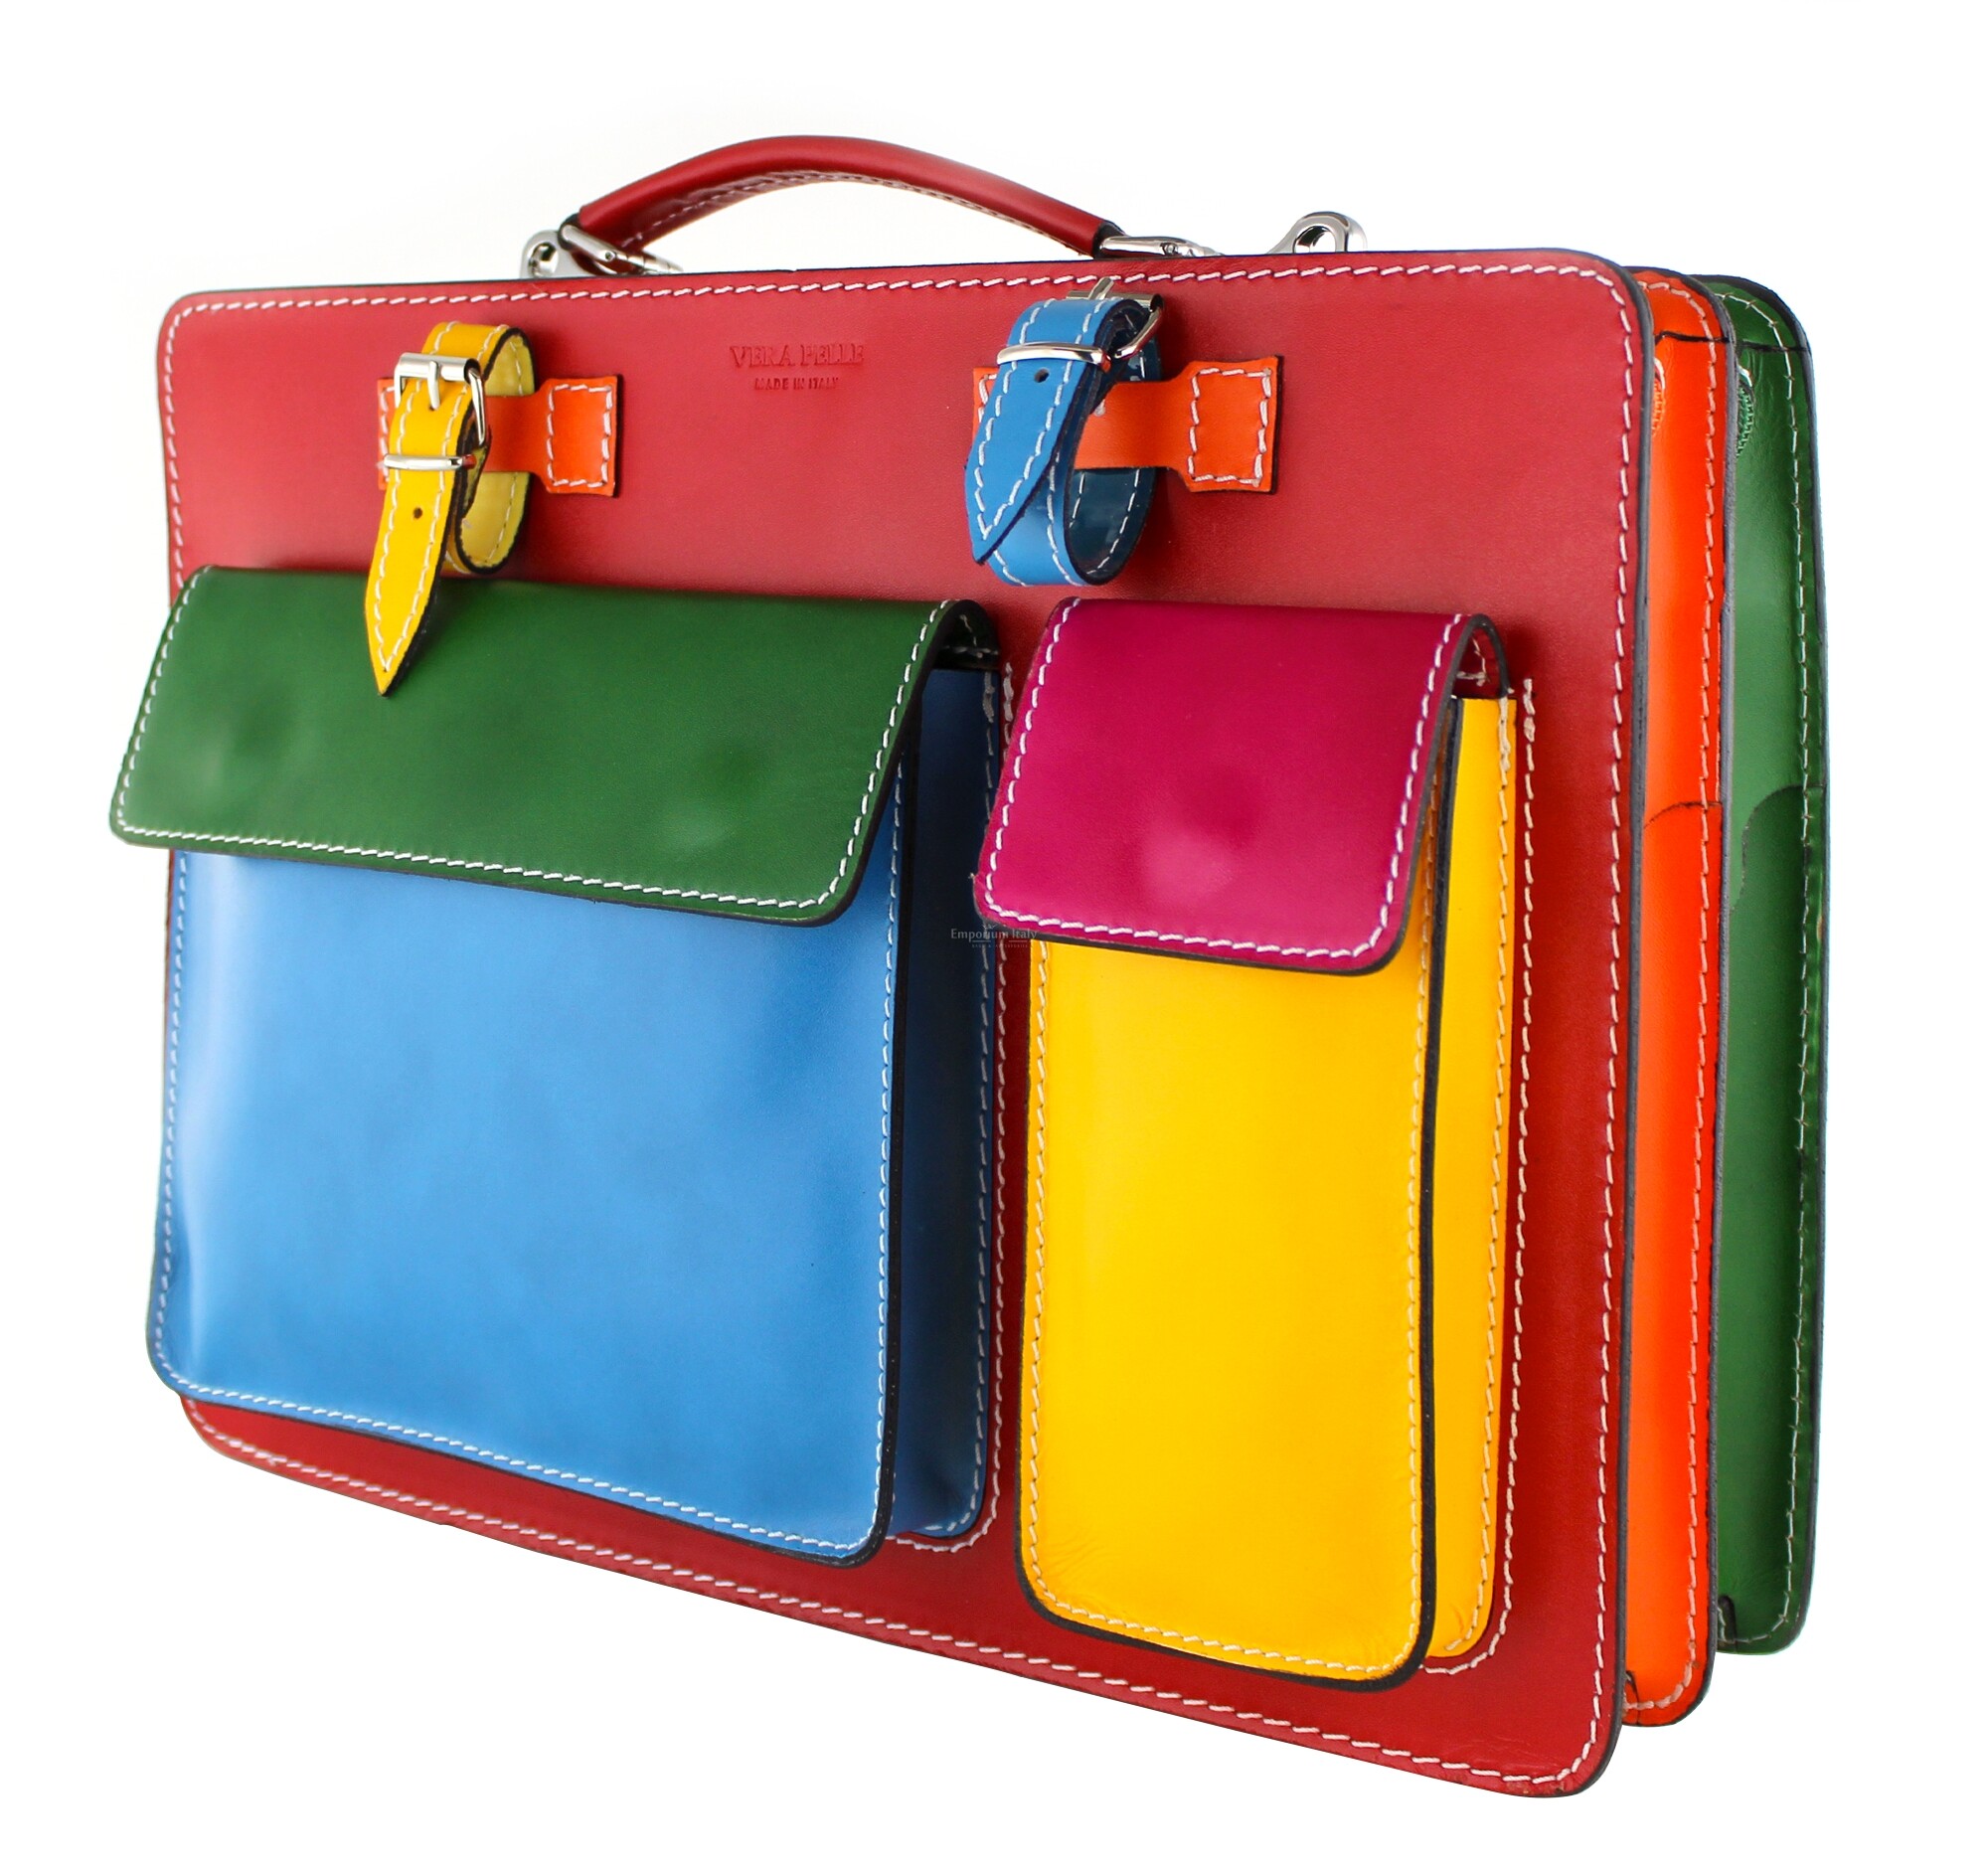 ELVI MAXI: work / office bag in genuine leather, MULTICOLOR red base, with  shoulder strap, CHIAROSCURO, Made in Italy., RECOMMENDED